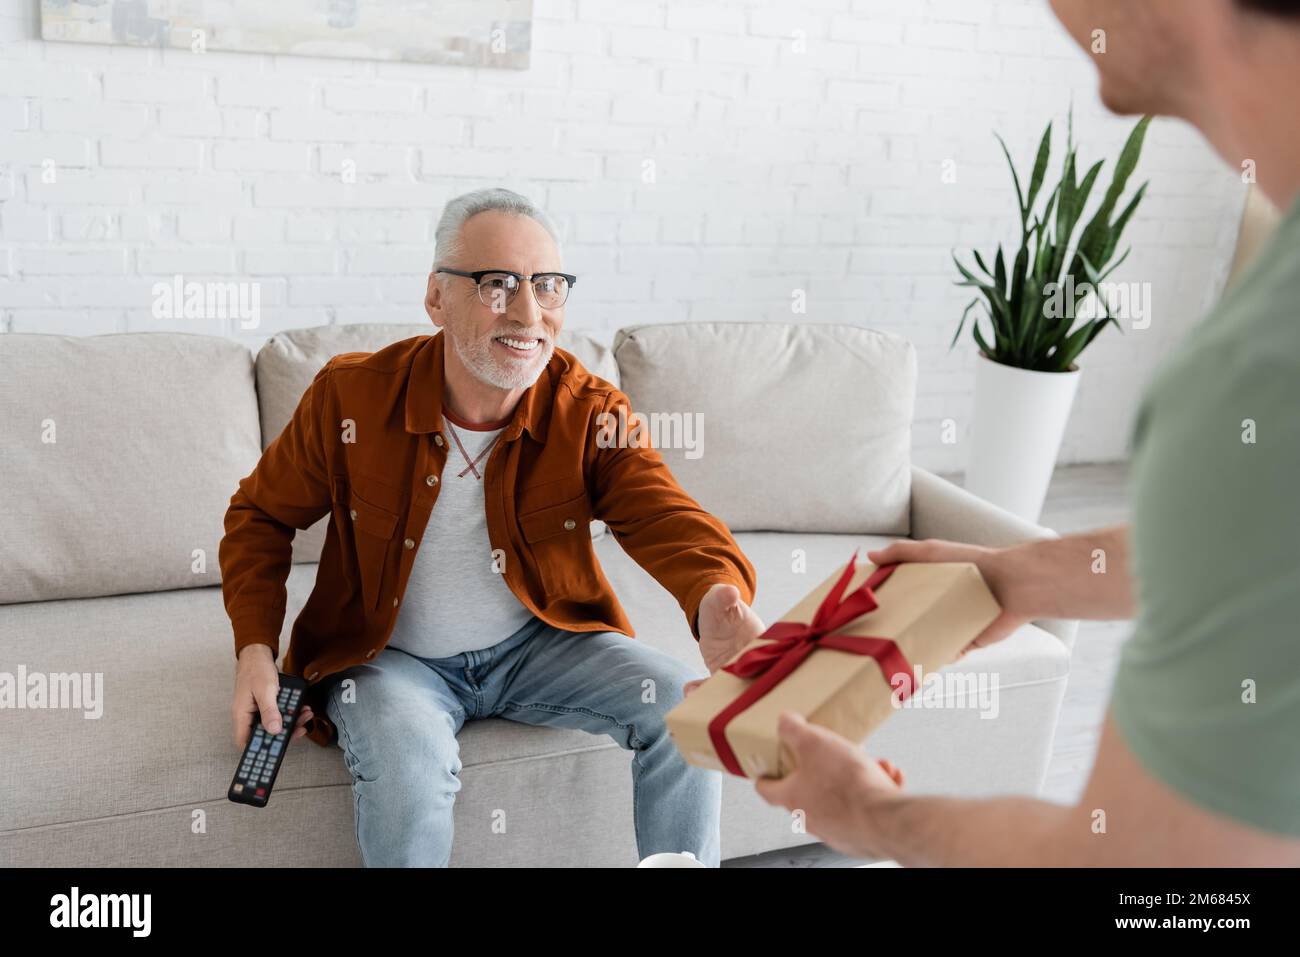 blurred man holding fathers day gift near smiling dad sitting on couch with tv remote controller,stock image Stock Photo